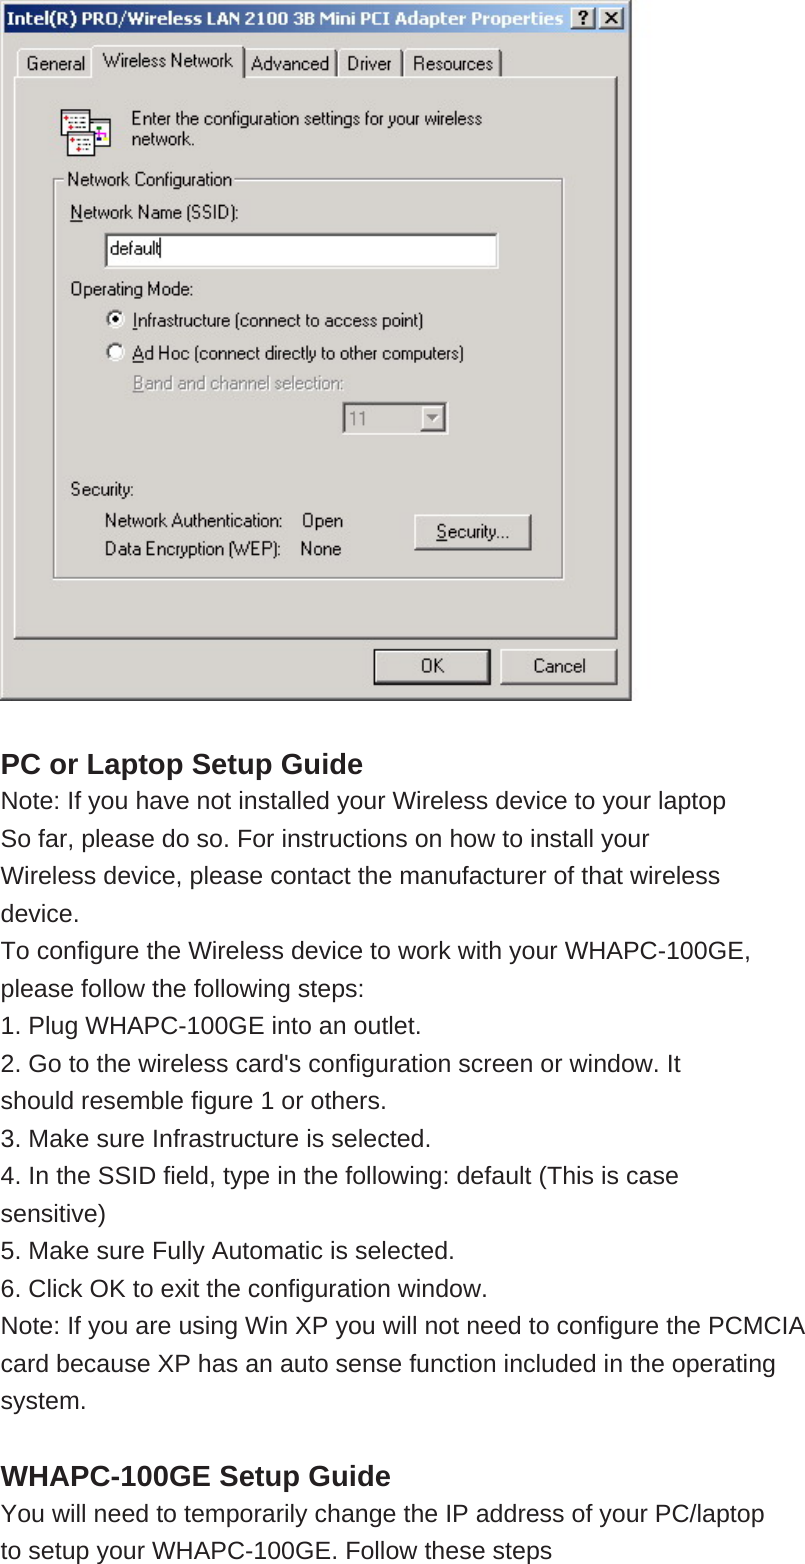    PC or Laptop Setup Guide Note: If you have not installed your Wireless device to your laptop So far, please do so. For instructions on how to install your Wireless device, please contact the manufacturer of that wireless device. To configure the Wireless device to work with your WHAPC-100GE, please follow the following steps: 1. Plug WHAPC-100GE into an outlet. 2. Go to the wireless card&apos;s configuration screen or window. It should resemble figure 1 or others. 3. Make sure Infrastructure is selected. 4. In the SSID field, type in the following: default (This is case sensitive) 5. Make sure Fully Automatic is selected. 6. Click OK to exit the configuration window. Note: If you are using Win XP you will not need to configure the PCMCIA card because XP has an auto sense function included in the operating system.  WHAPC-100GE Setup Guide You will need to temporarily change the IP address of your PC/laptop to setup your WHAPC-100GE. Follow these steps 